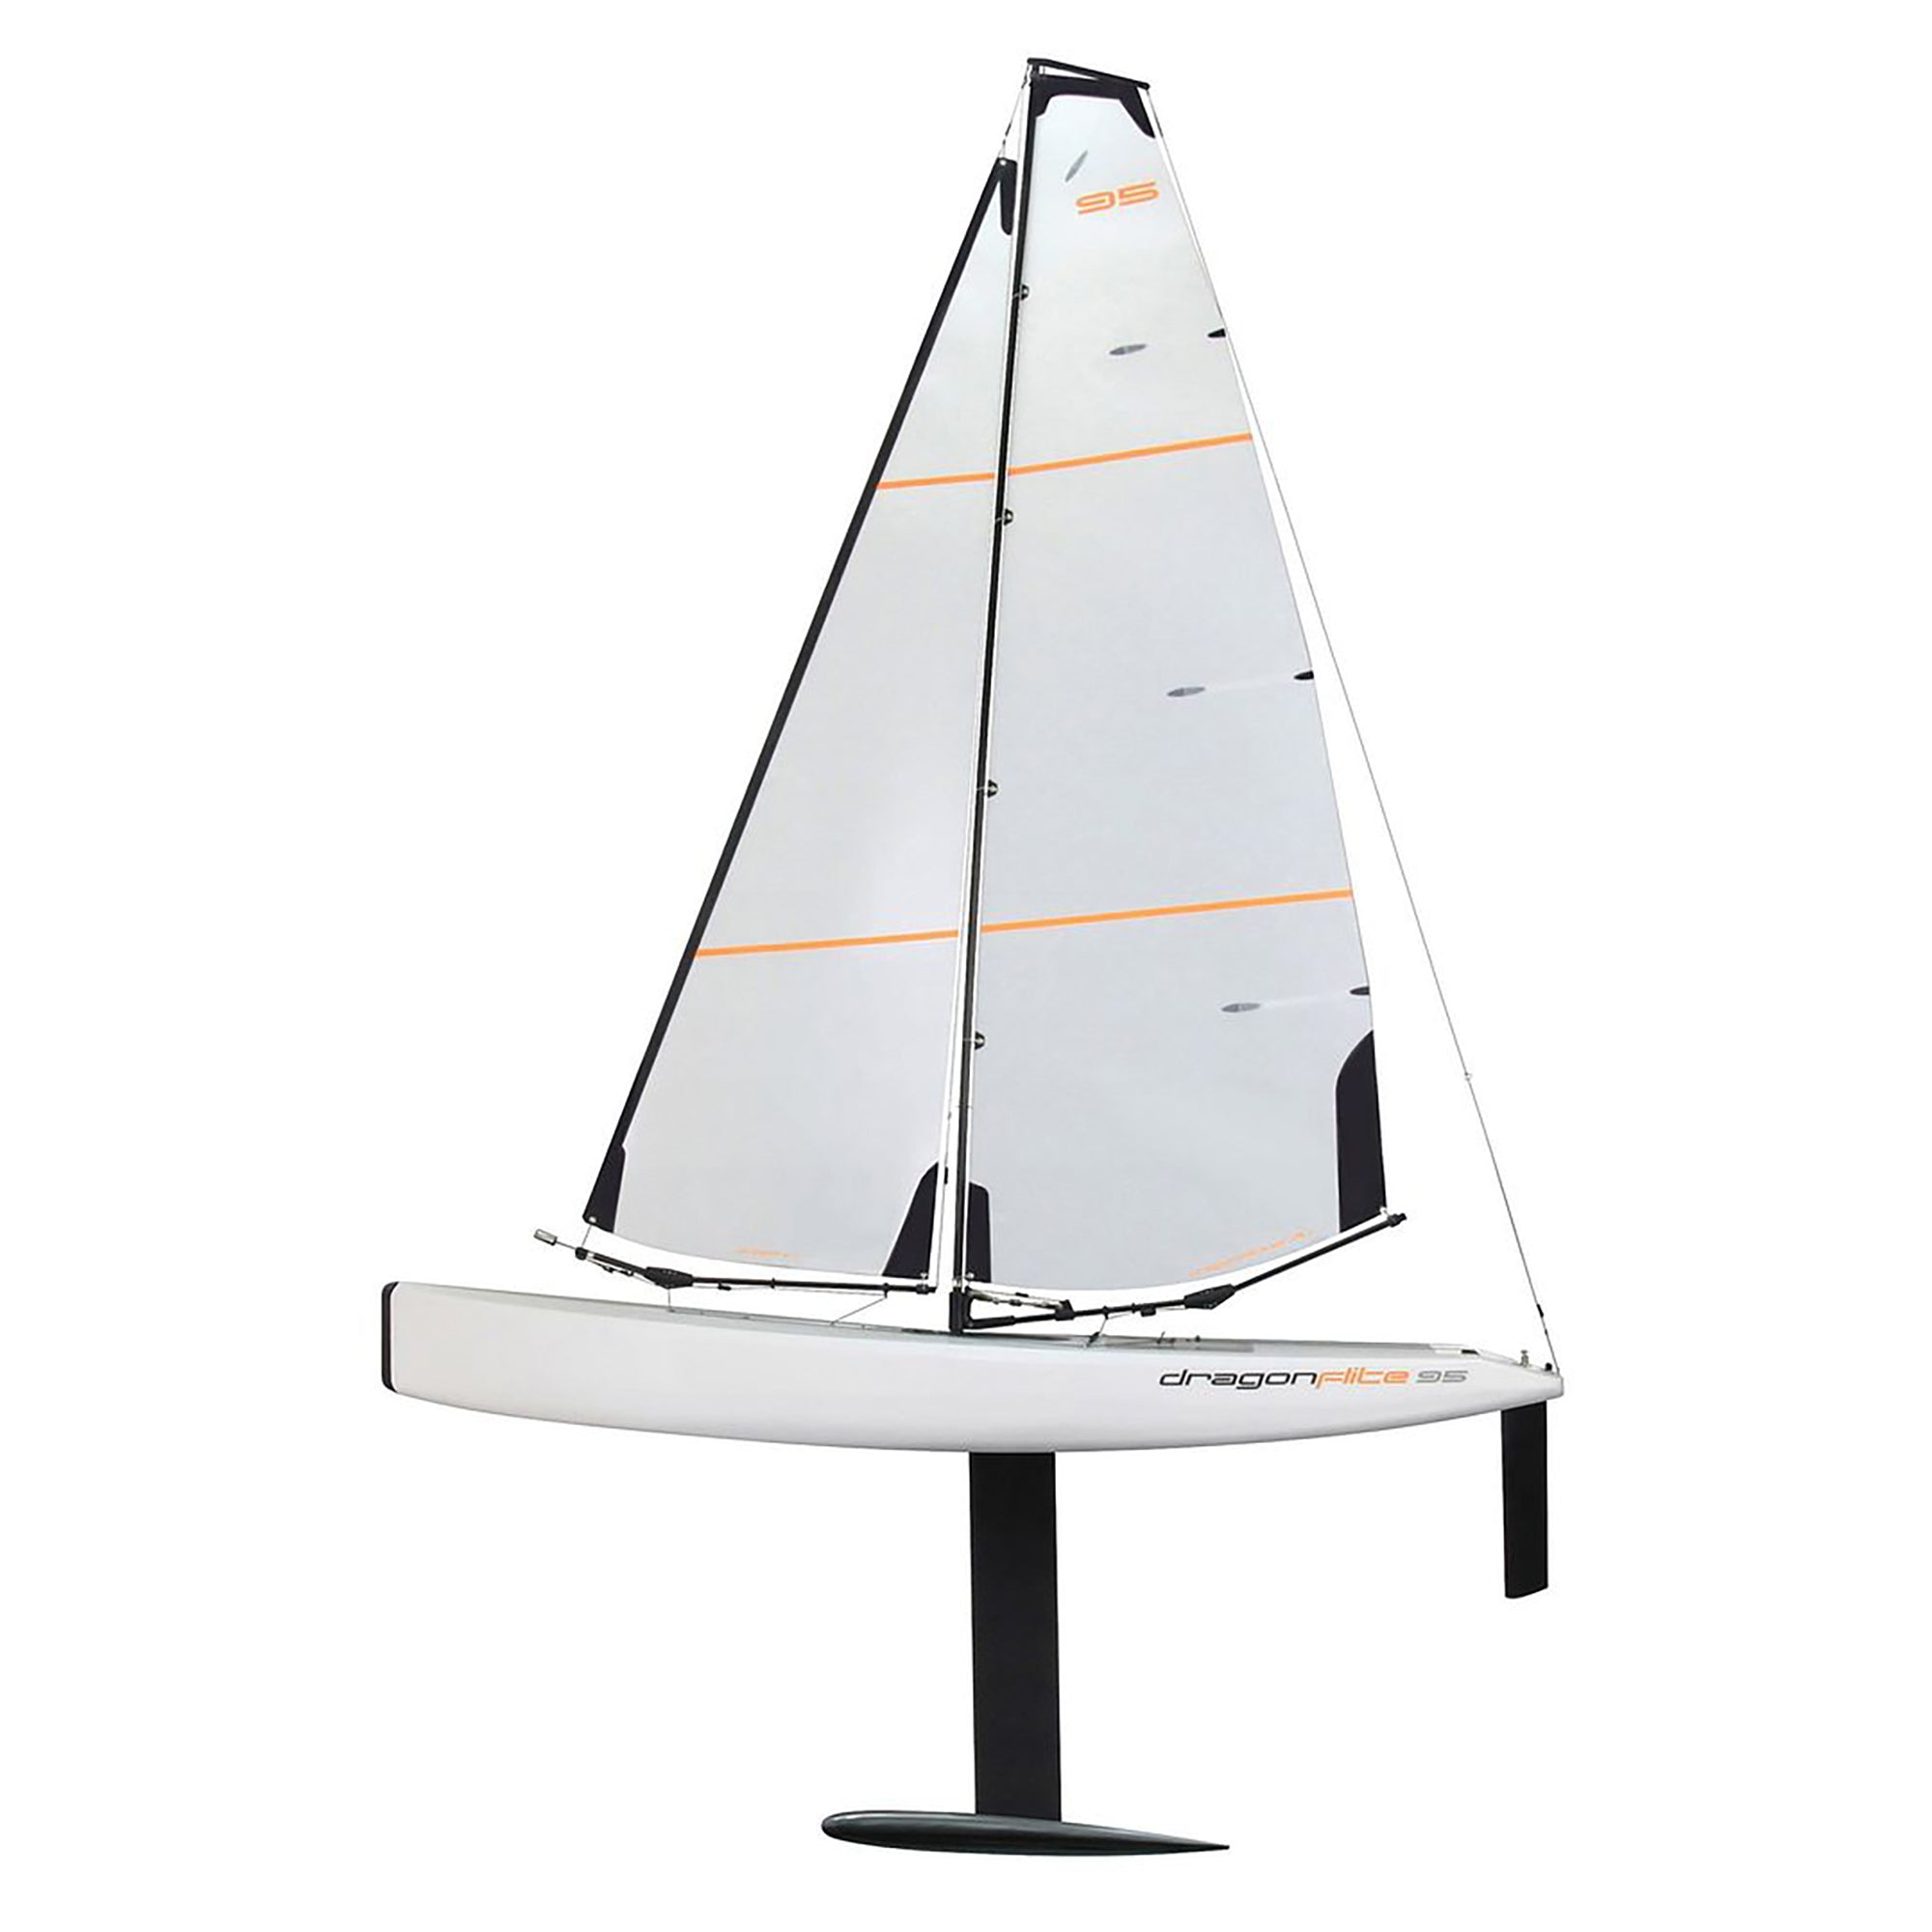 Joysway 8811 V2 DragonFlite 95 DF95 White Hull Radio Control Racing Sailboat (without Transmitter or Receiver), Multicolour